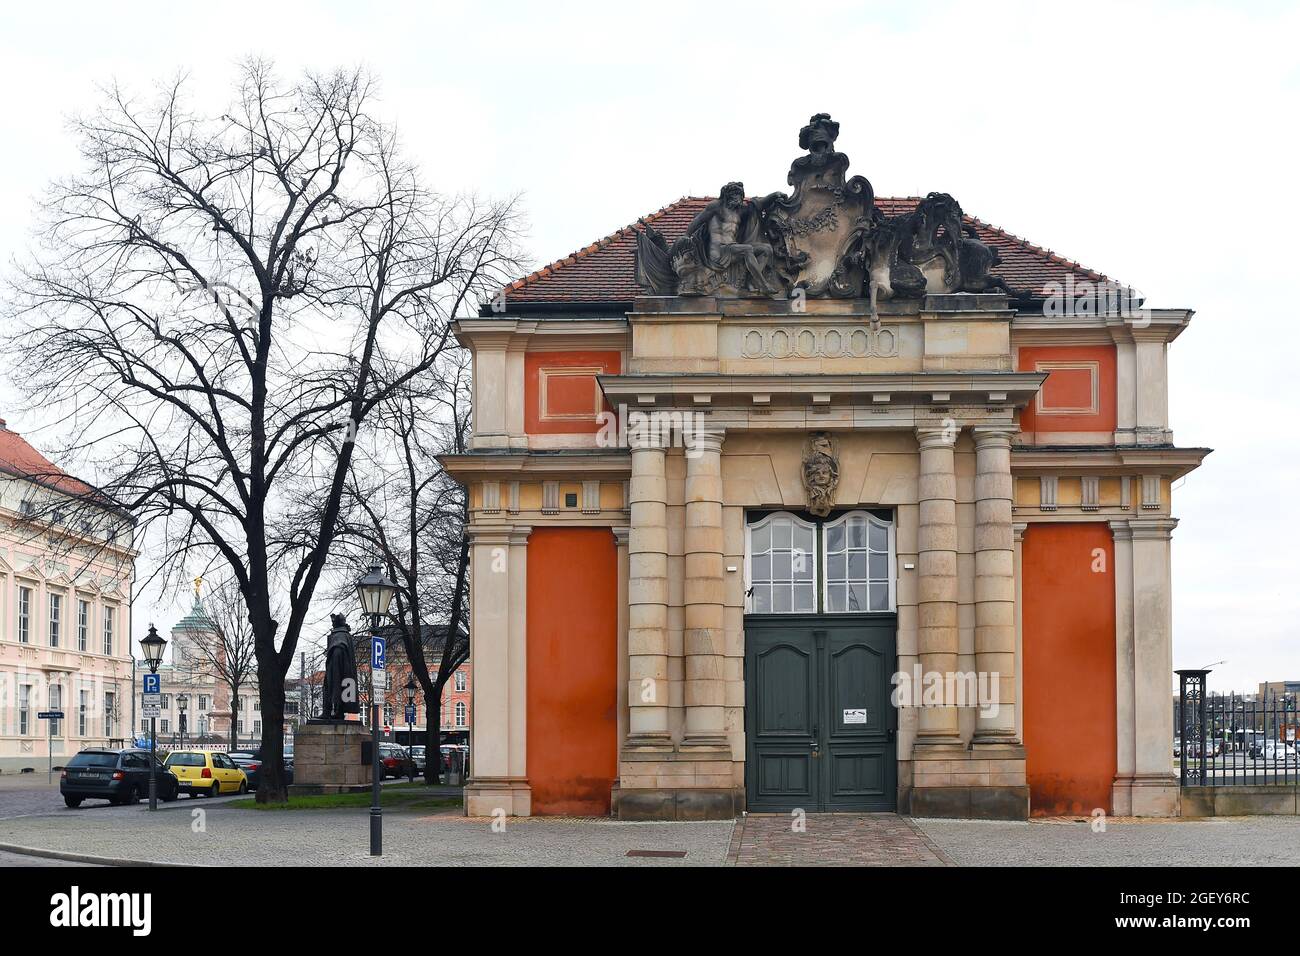 Potsdam, Germany - December 2, 2019: Side view of Filmmuseum Potsdam. Oldest film museum in Germany. Stock Photo